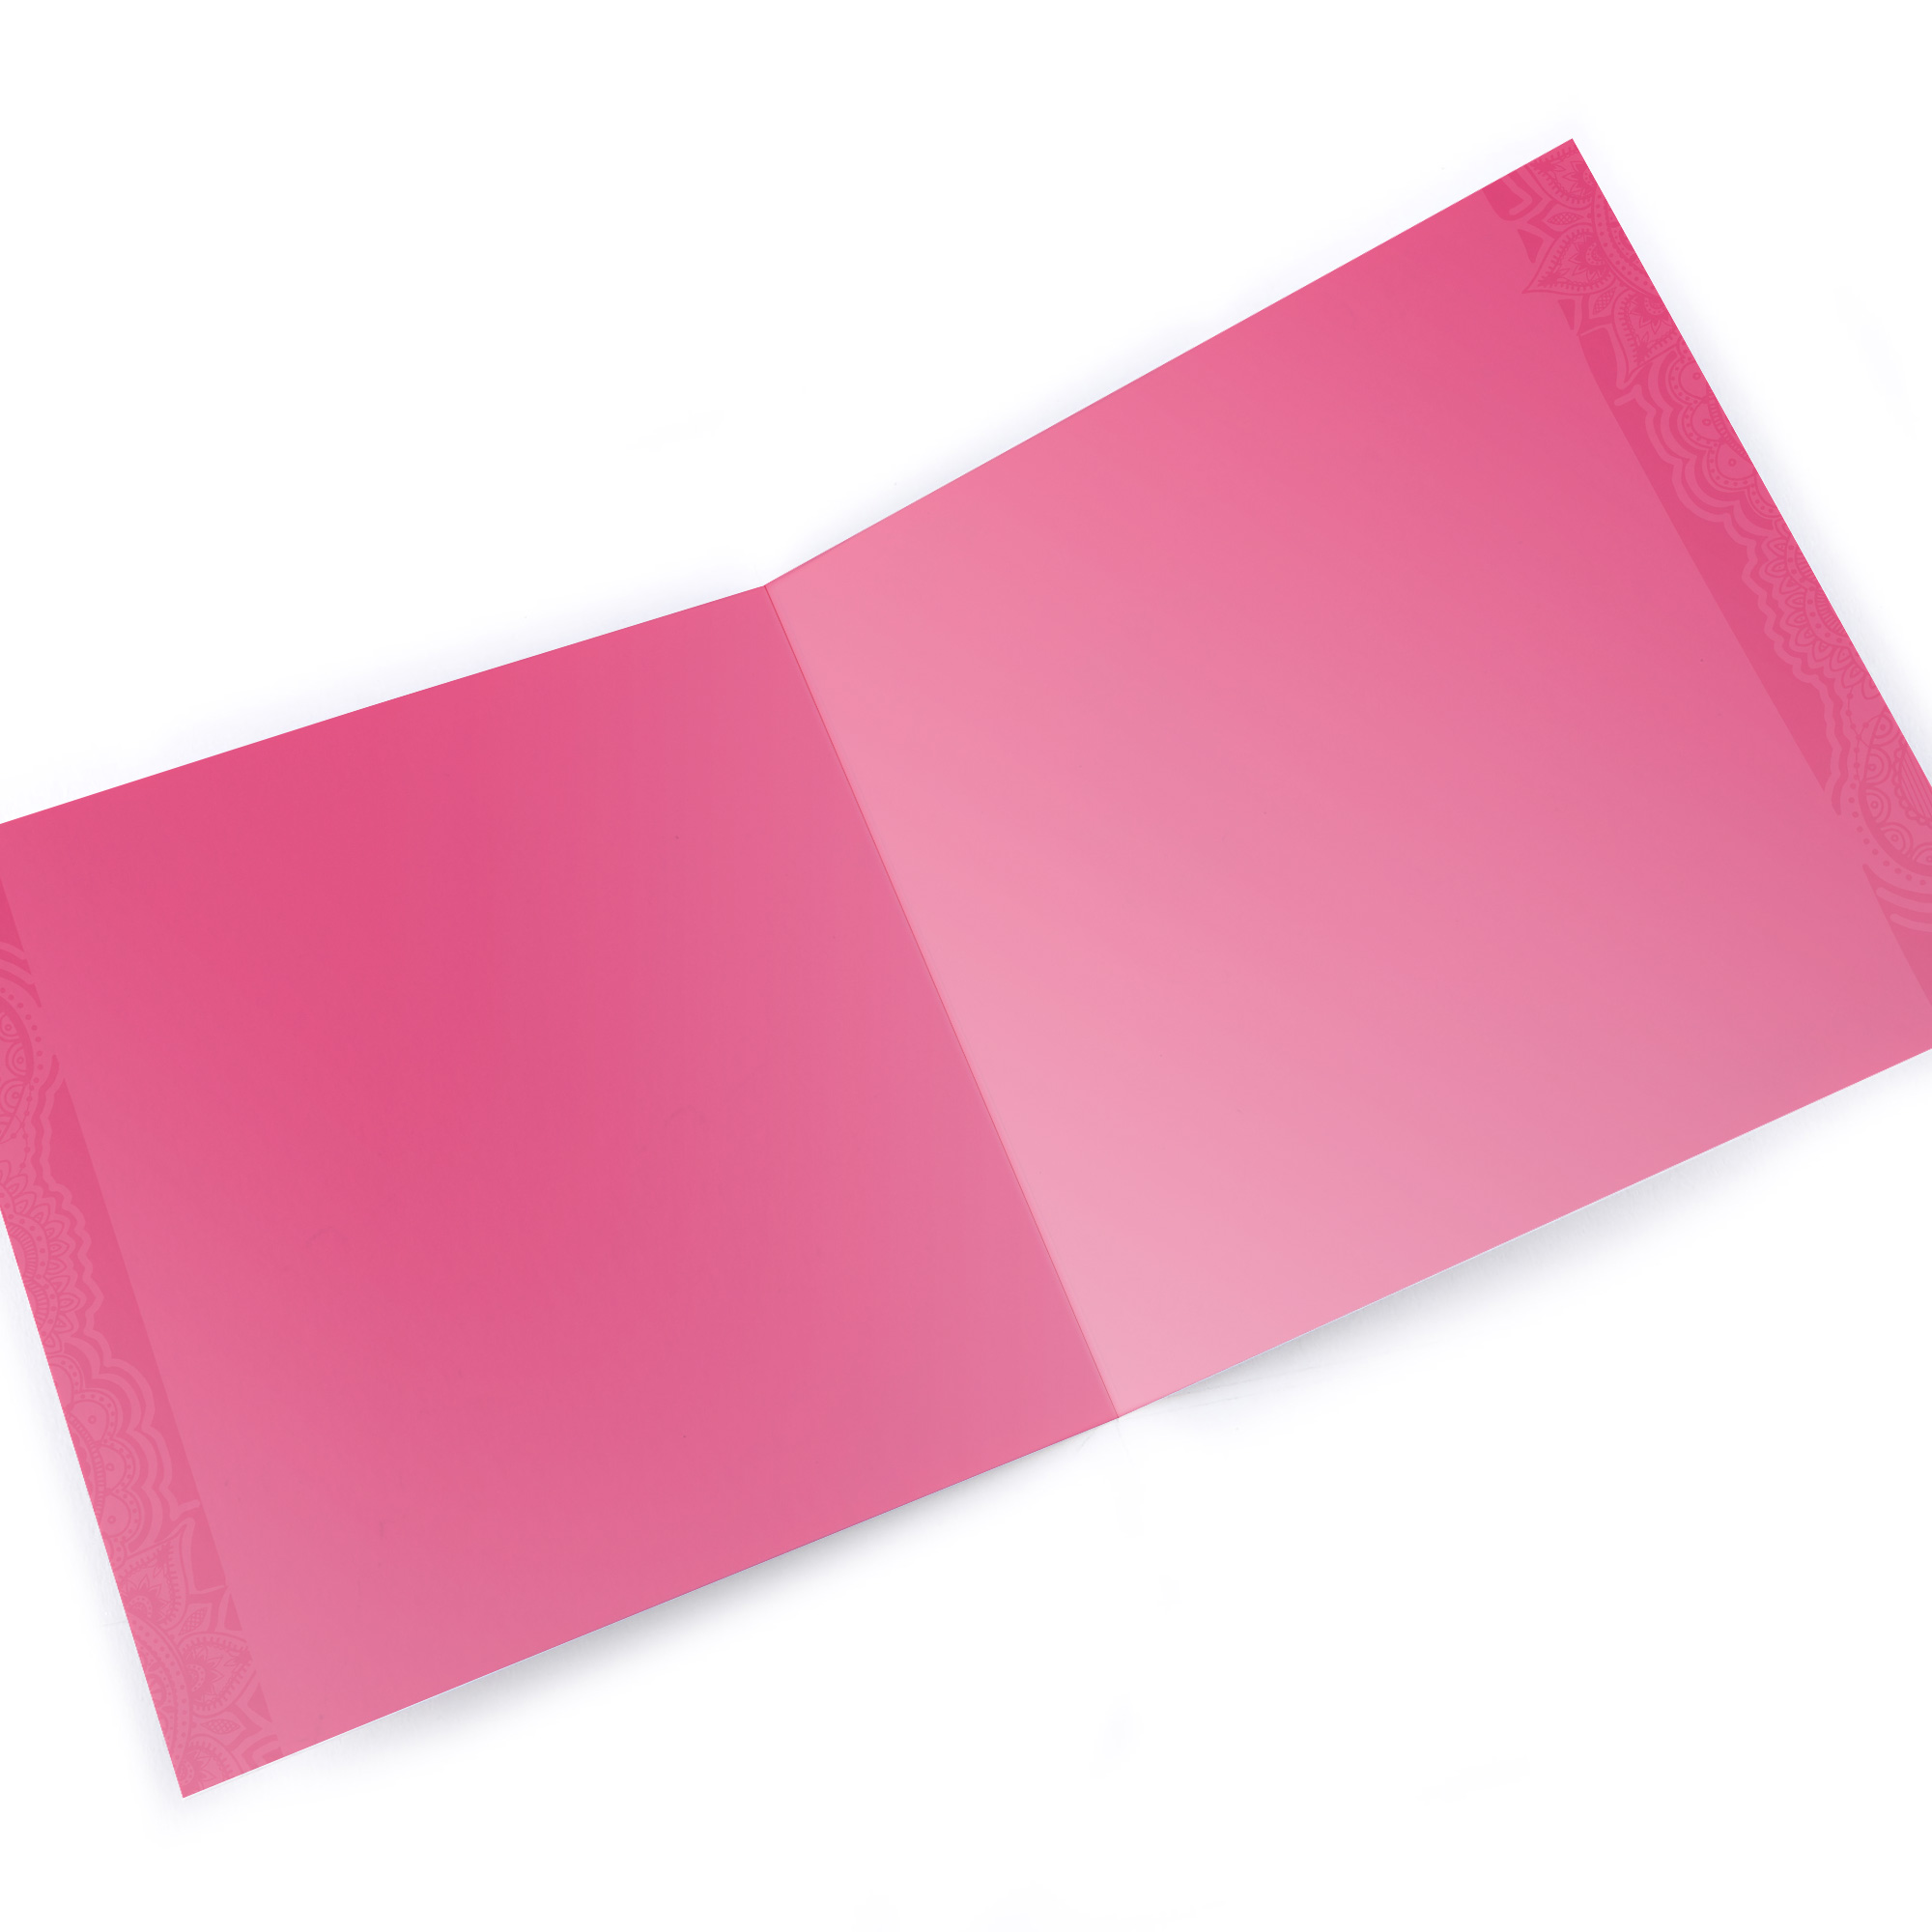 Photo Card - Pink Patterned With Tape